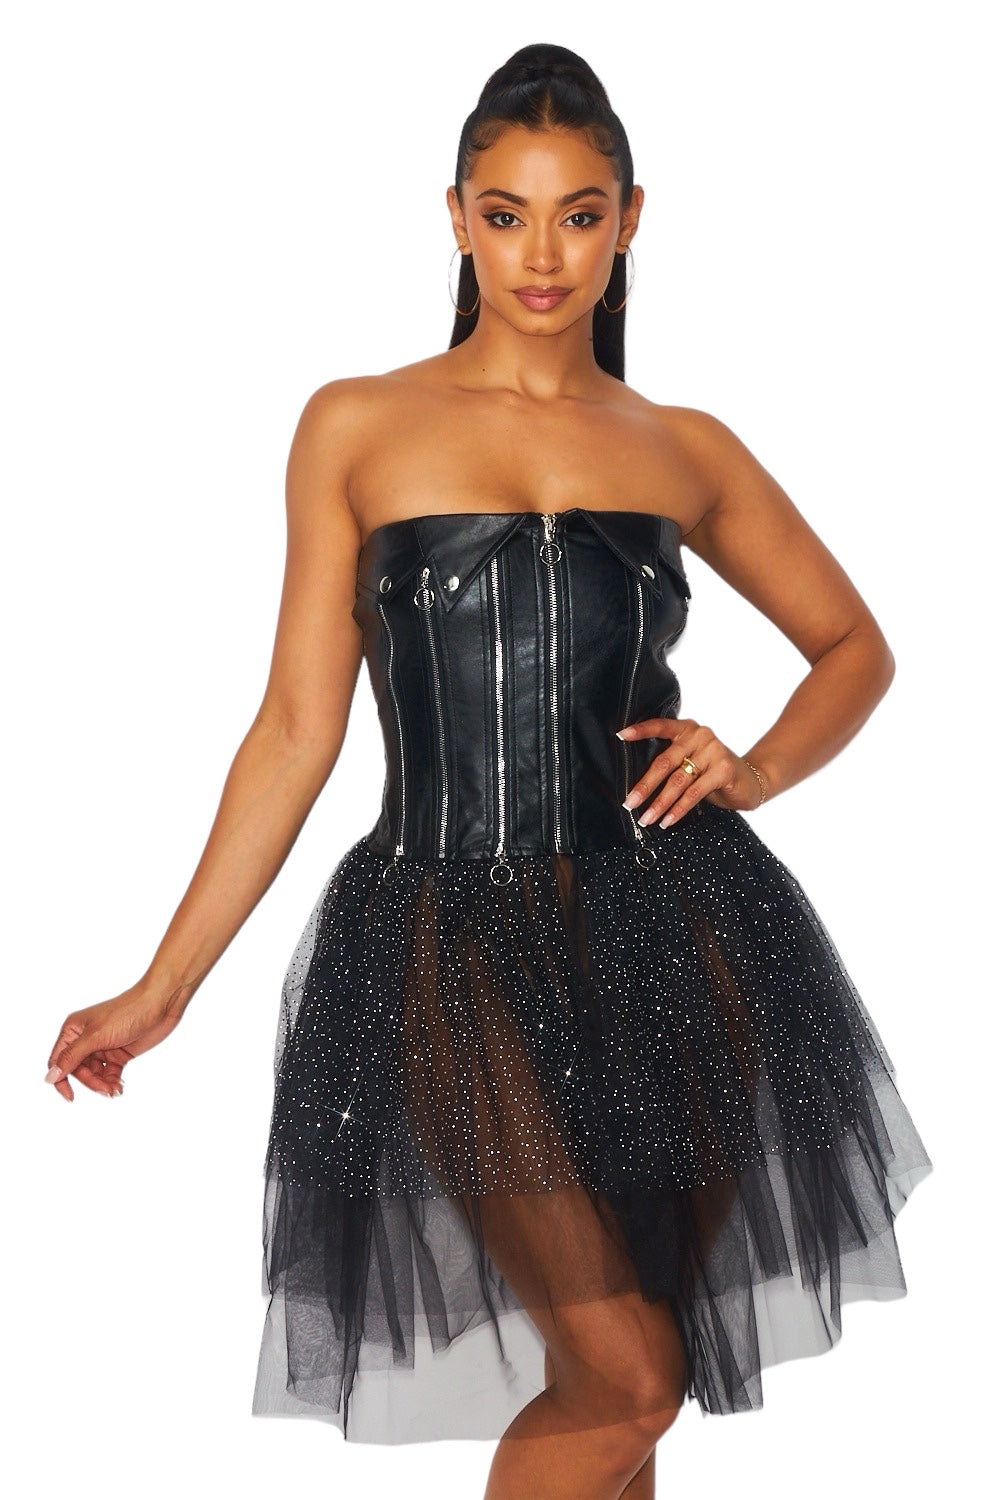 a woman wearing a black corset and skirt